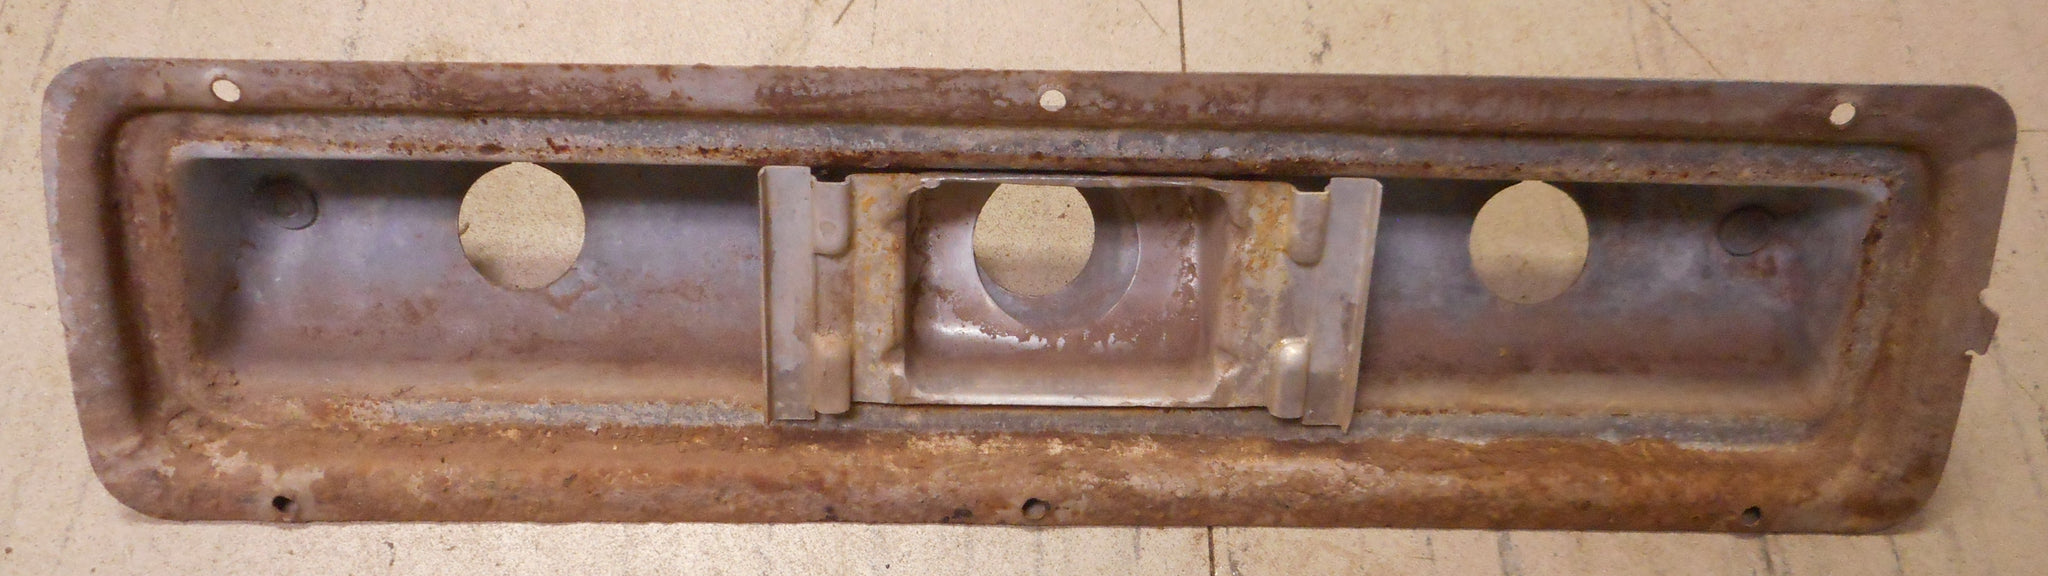 TAIL LIGHT HOUSING ,RIGHT, USED, 67 LEMANS